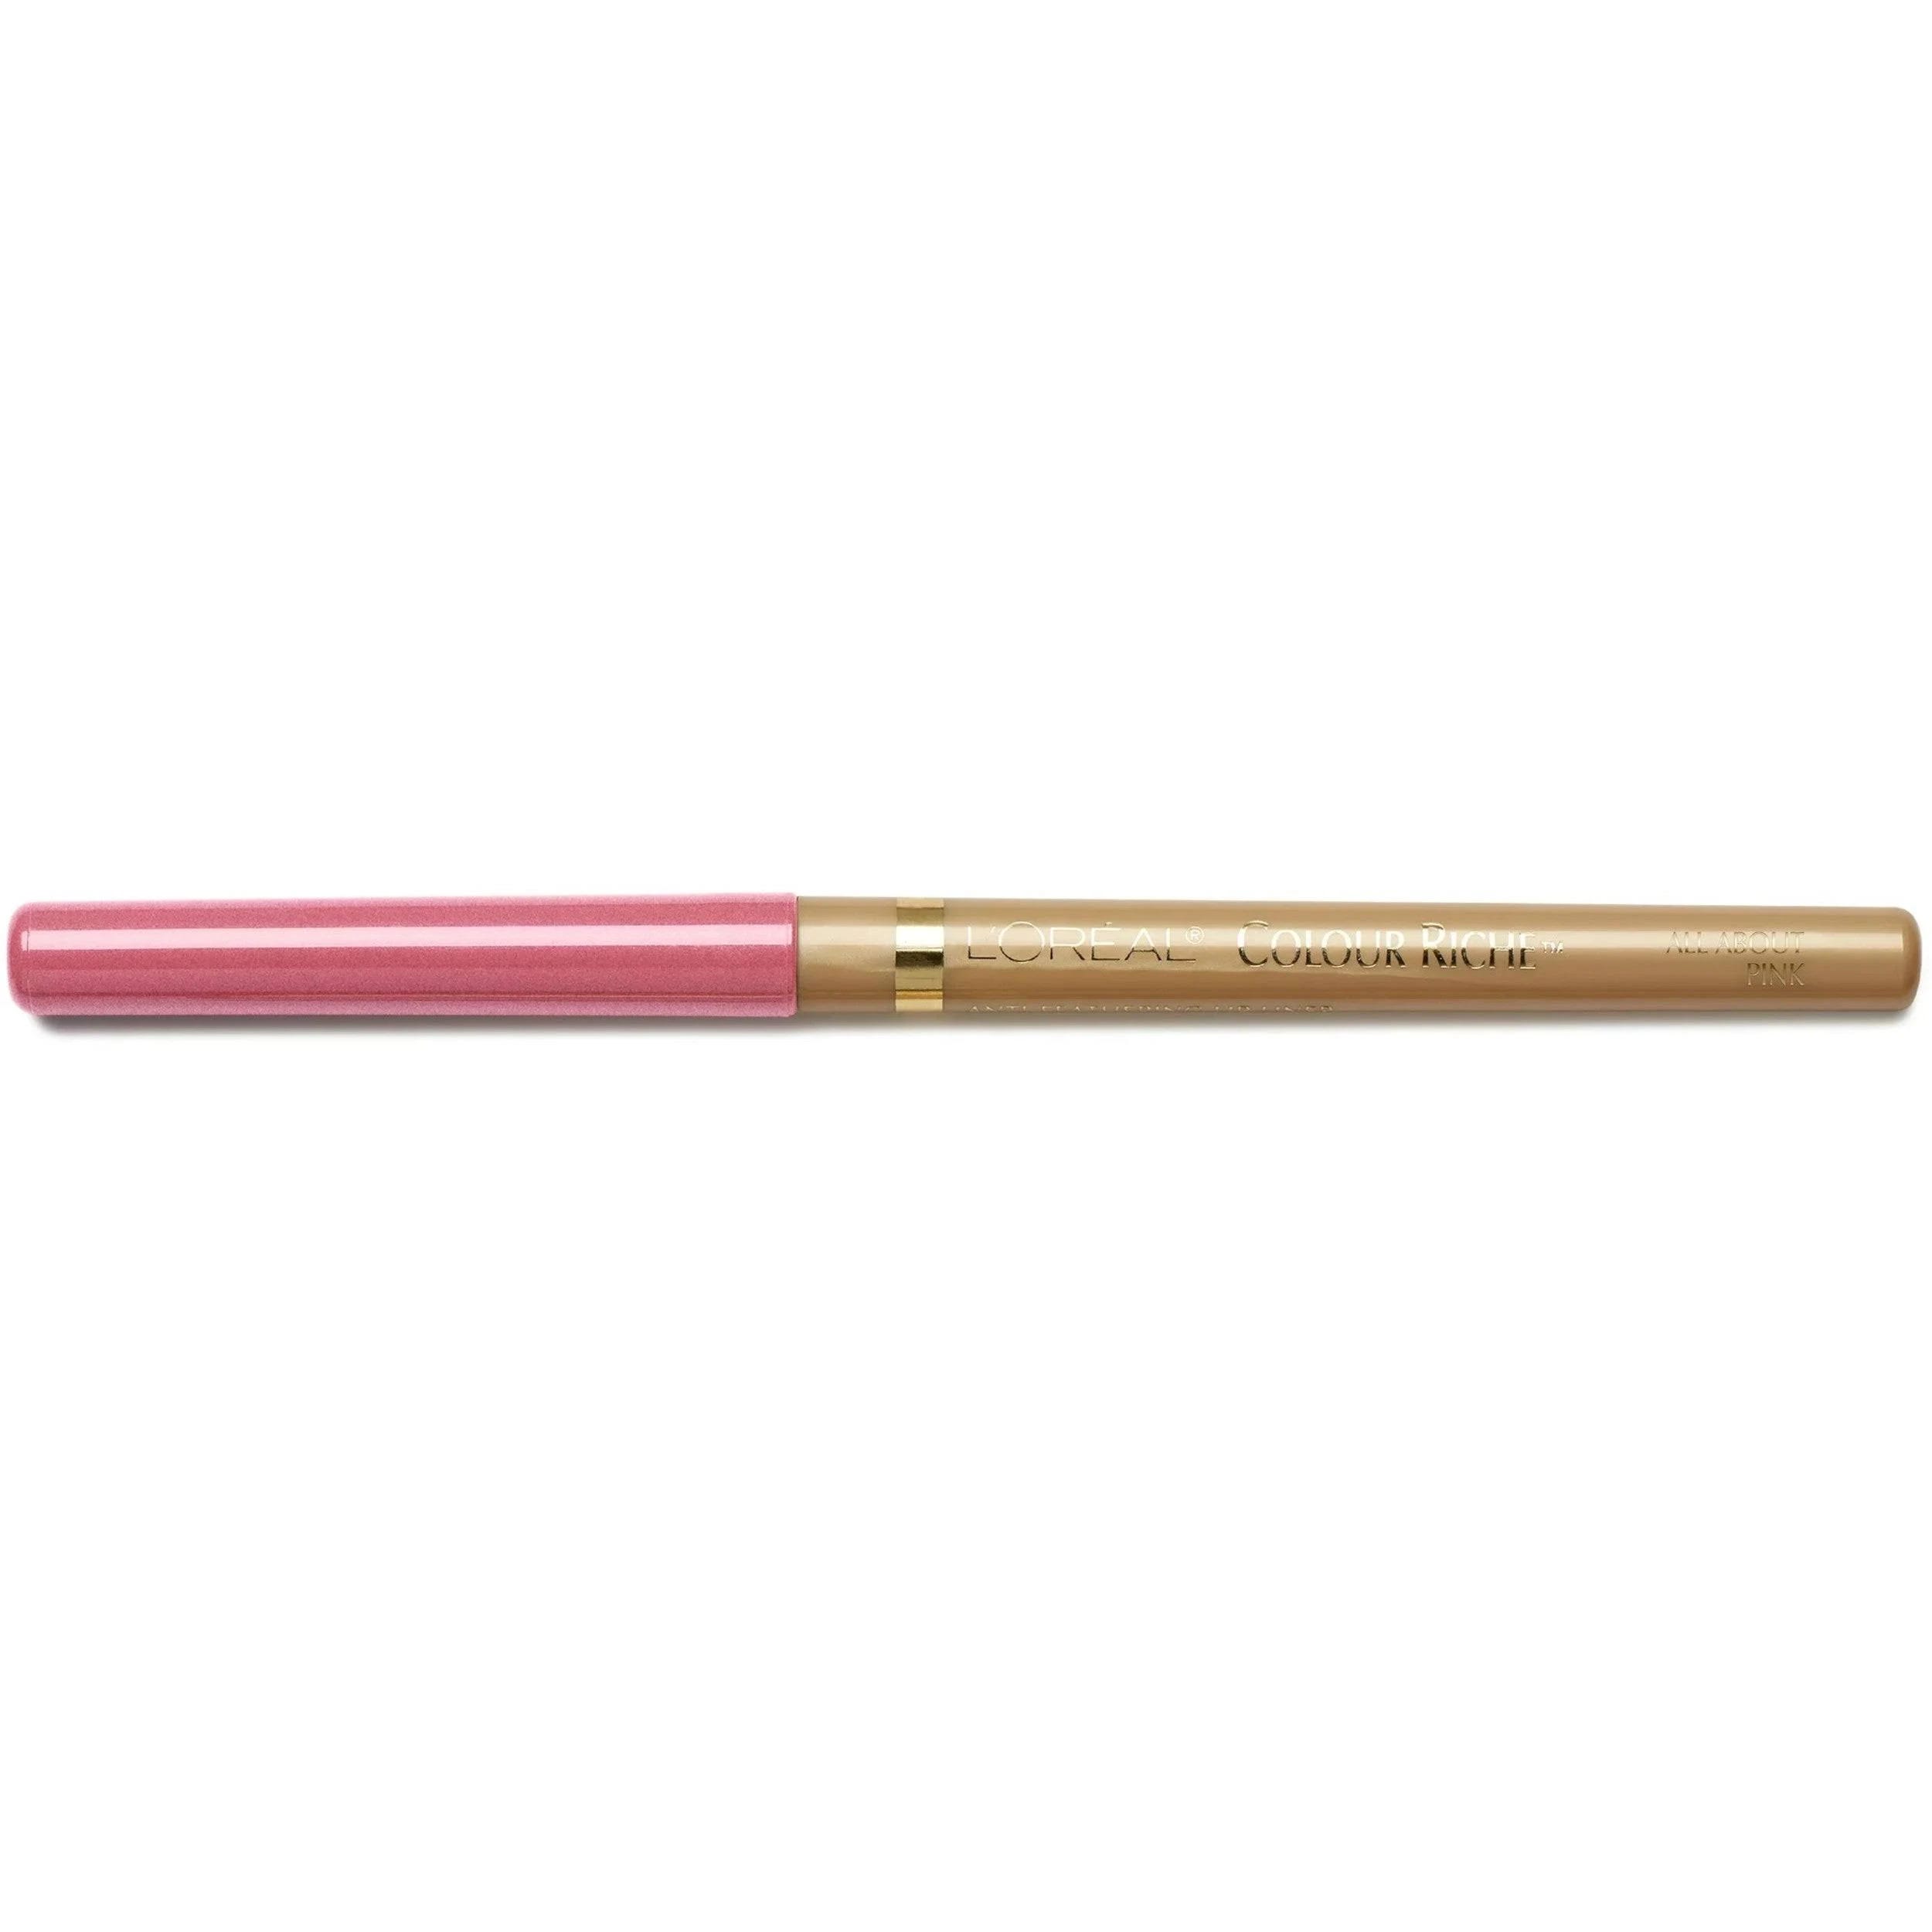 Nude Pink Lip Liner for Defining and Contouring Lips | Image